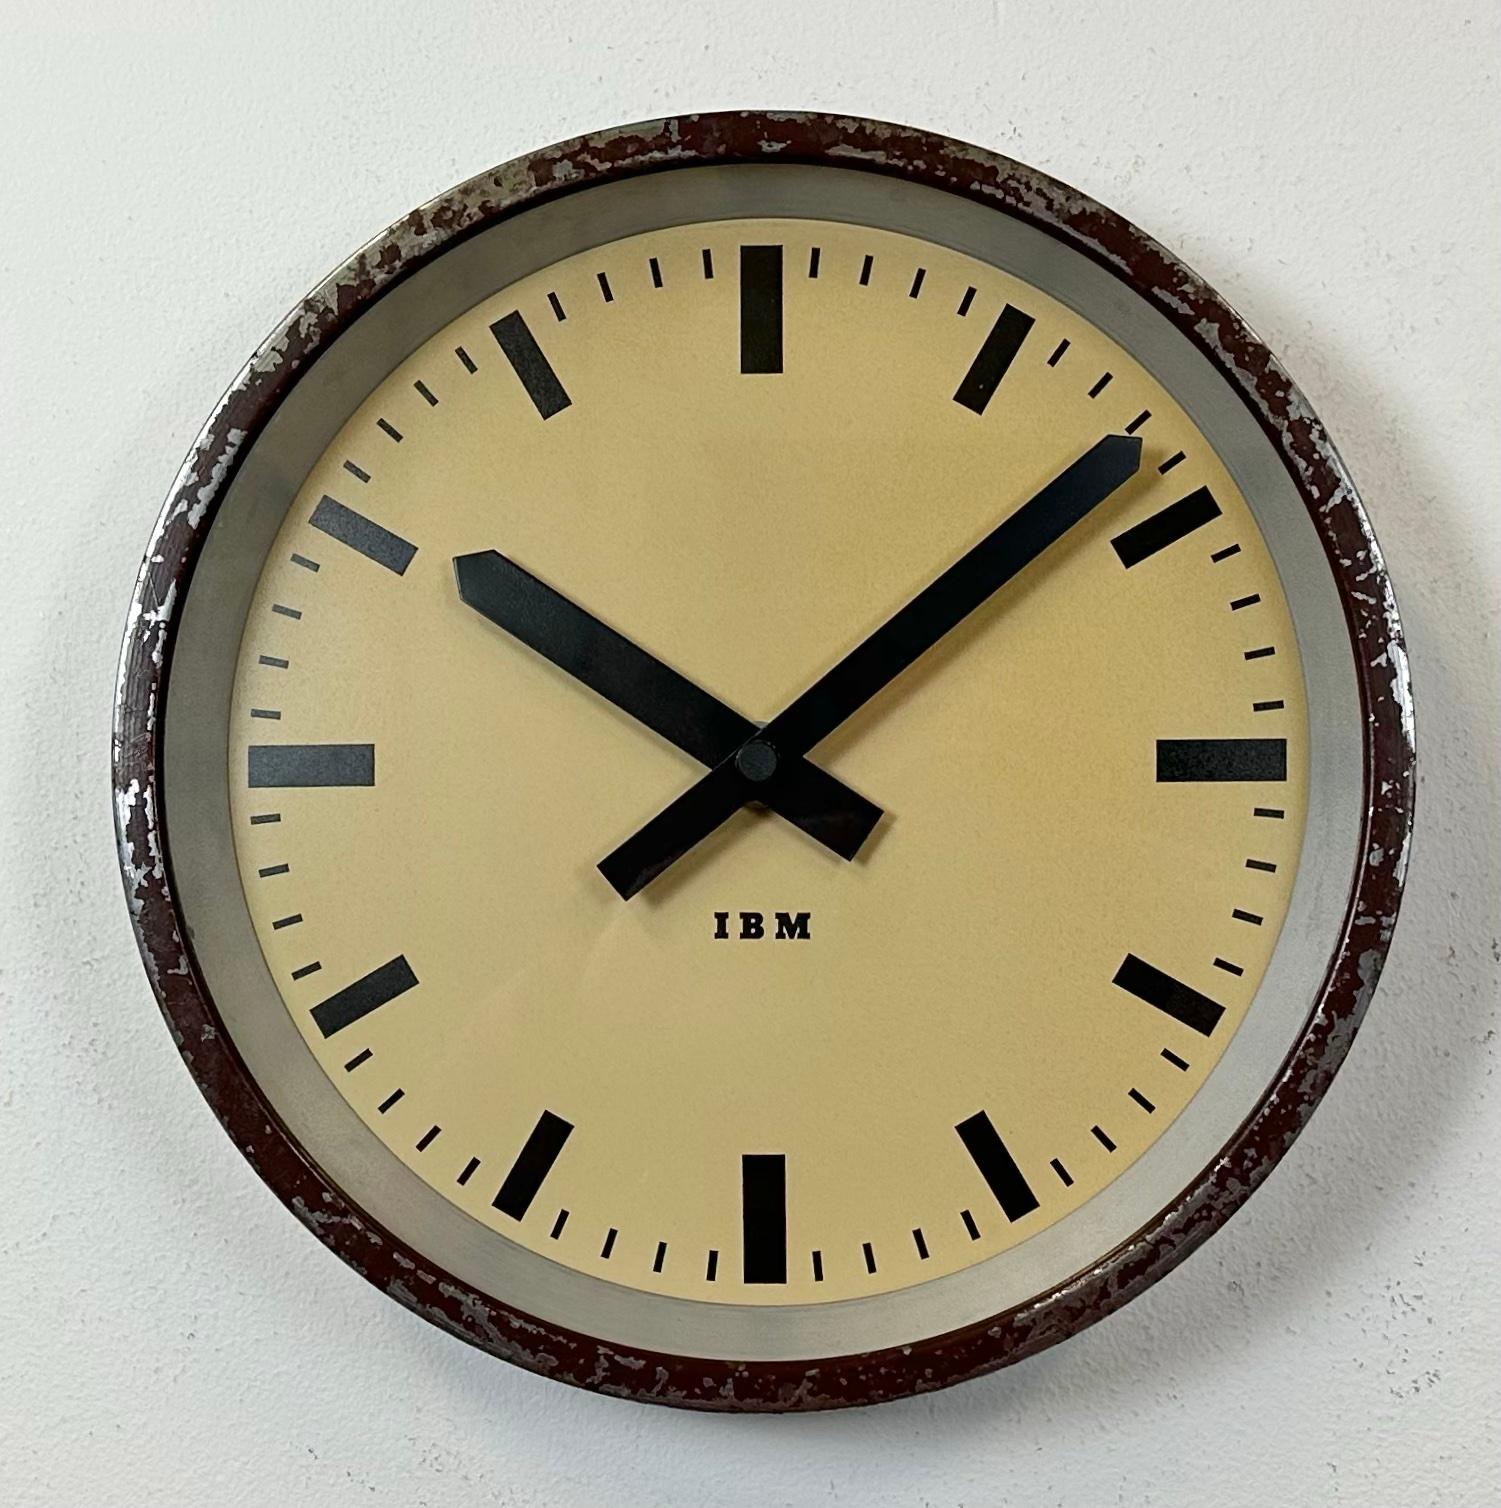 This wall clock was produced by IBM in USA during the 1950s. It features a brown metal frame, iron dial, aluminium hands and a clear glass cover. The piece has been converted into a battery-powered clockwork and requires only one AA-battery. The